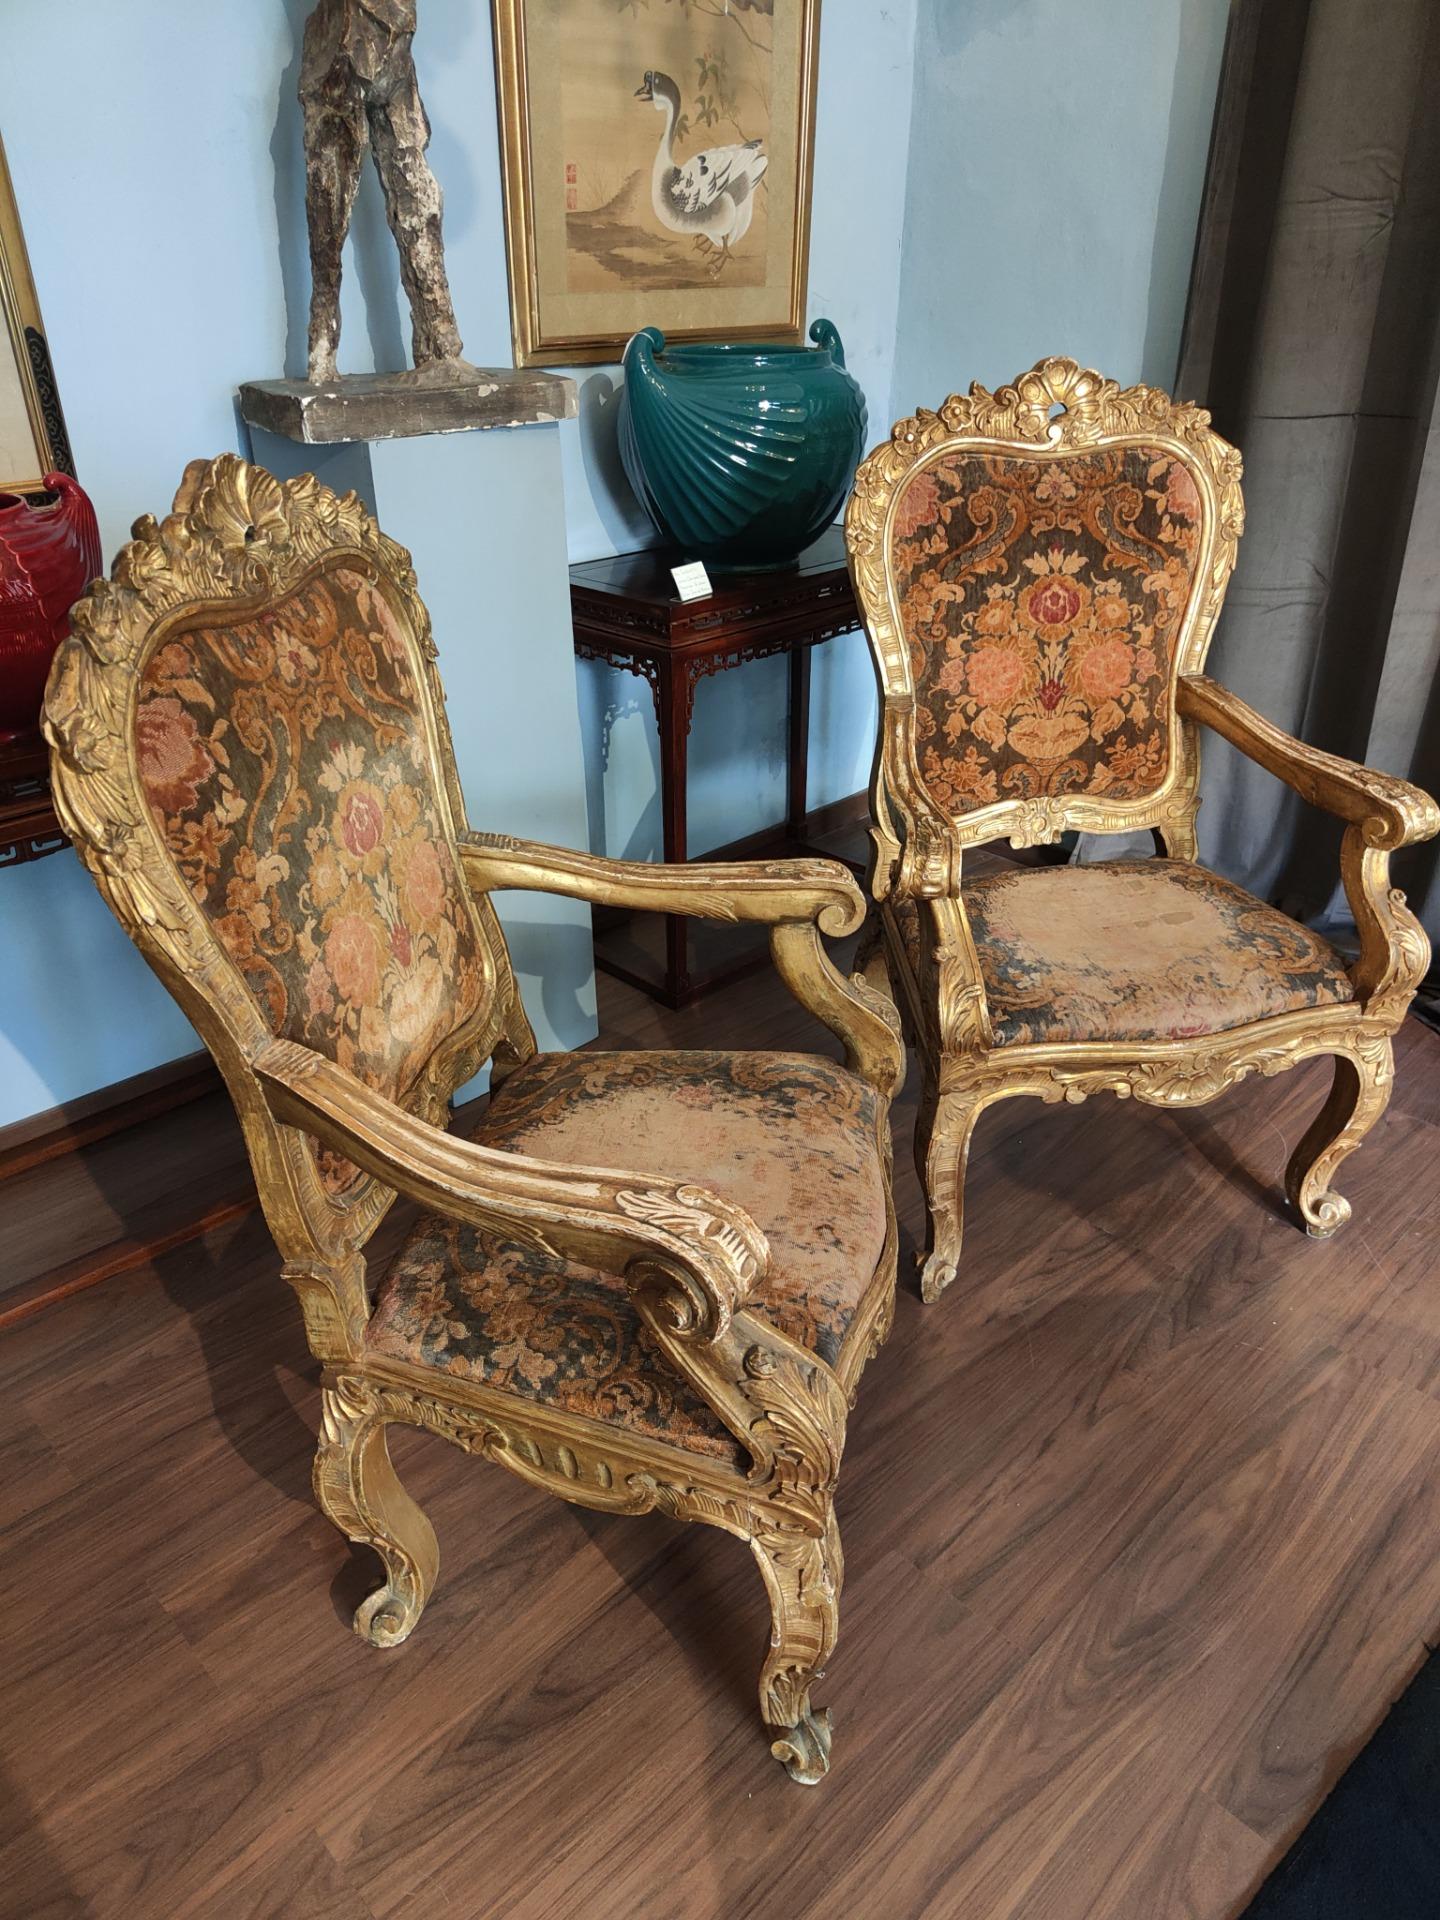 Beautiful Pair Of Armchairs, Rome, Period: 600.

Pair of giltwood armchairs, Roman manufacture, finely carved with rich floral and shell motifs. 
The upholstery is velvet; The tones are warm, ranging from browns to oranges to golds.
These armchairs